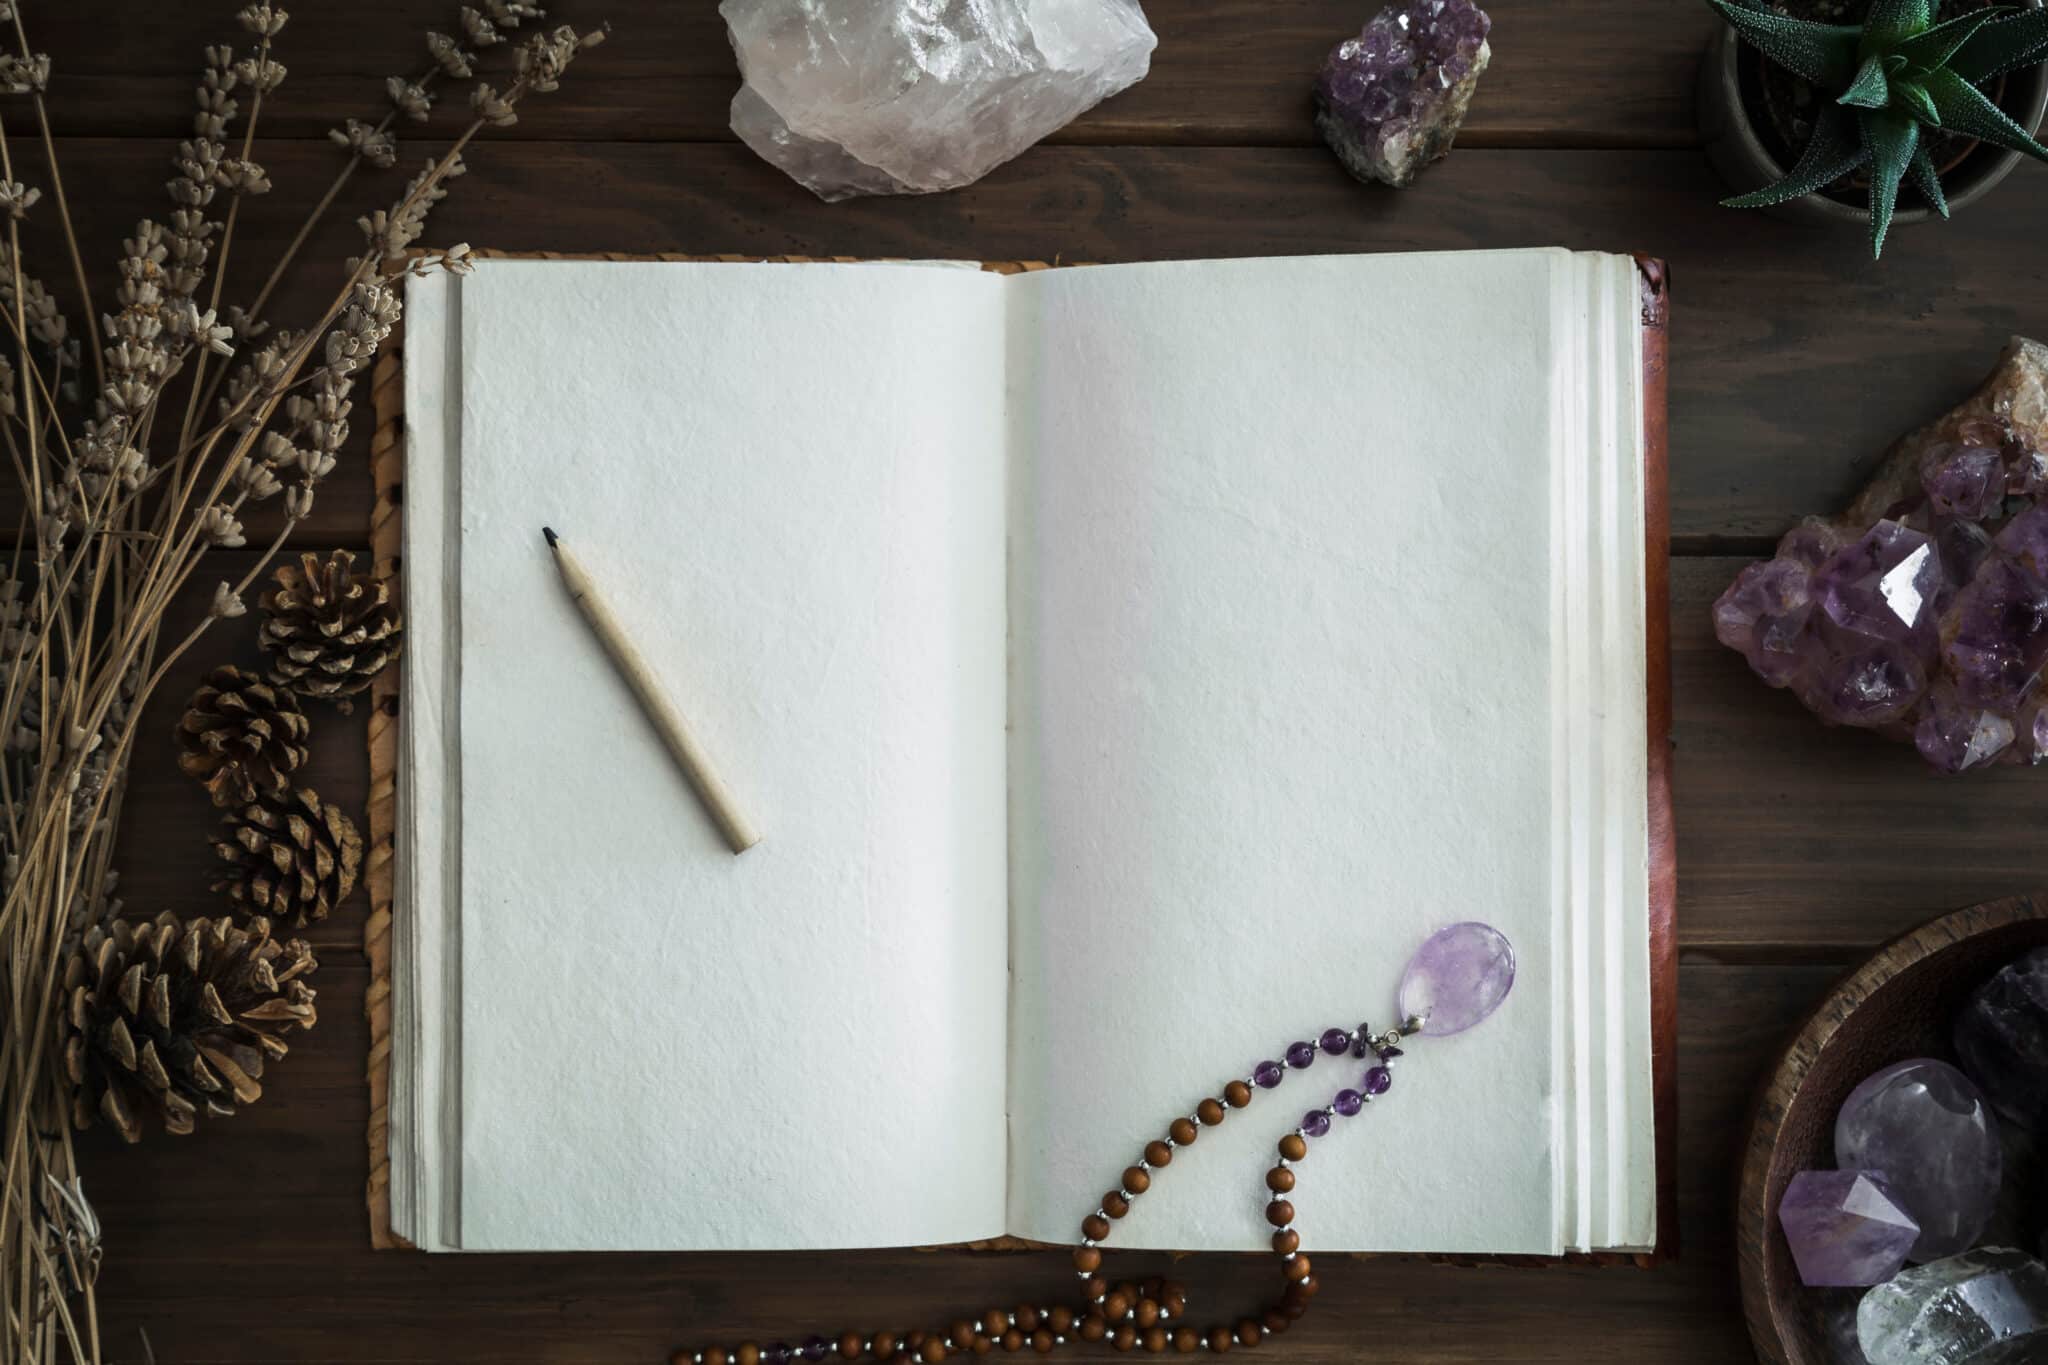 Open Notebook Surrounded by Crystals Plants and Foliage